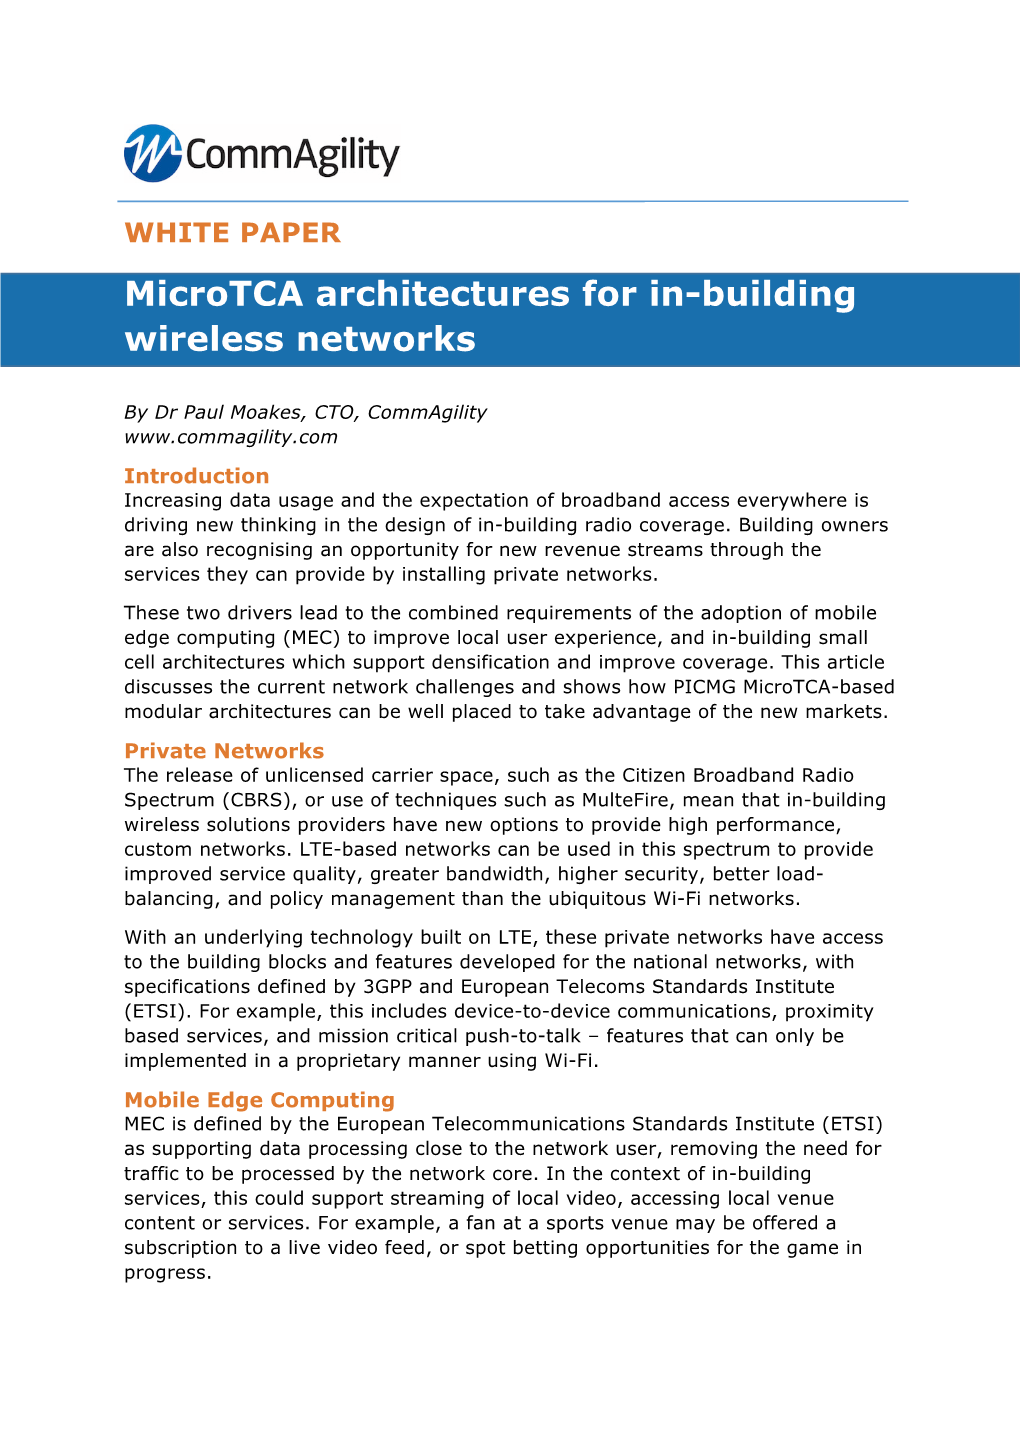 WHITE PAPER Microtca Architectures for In-Building Wireless Networks